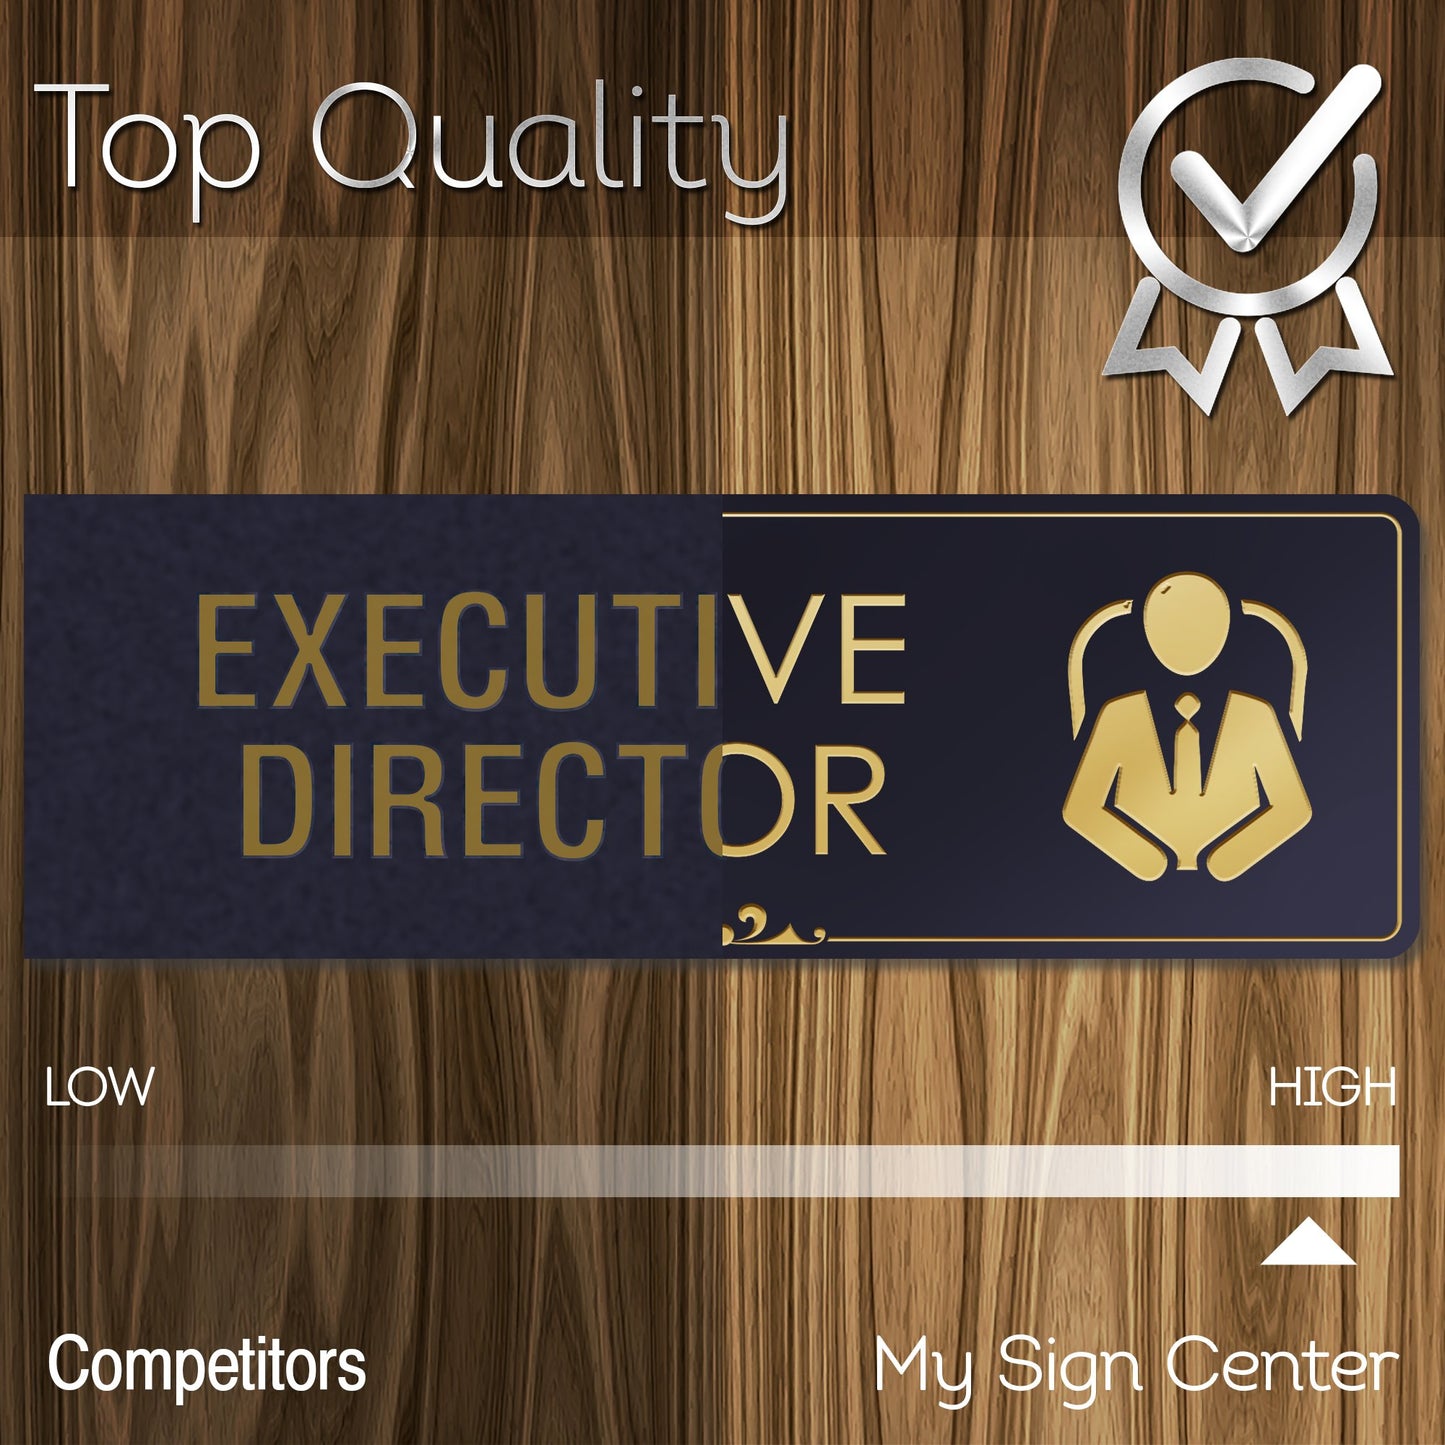 Executive Director Office Door Sign Name Plates for Desks